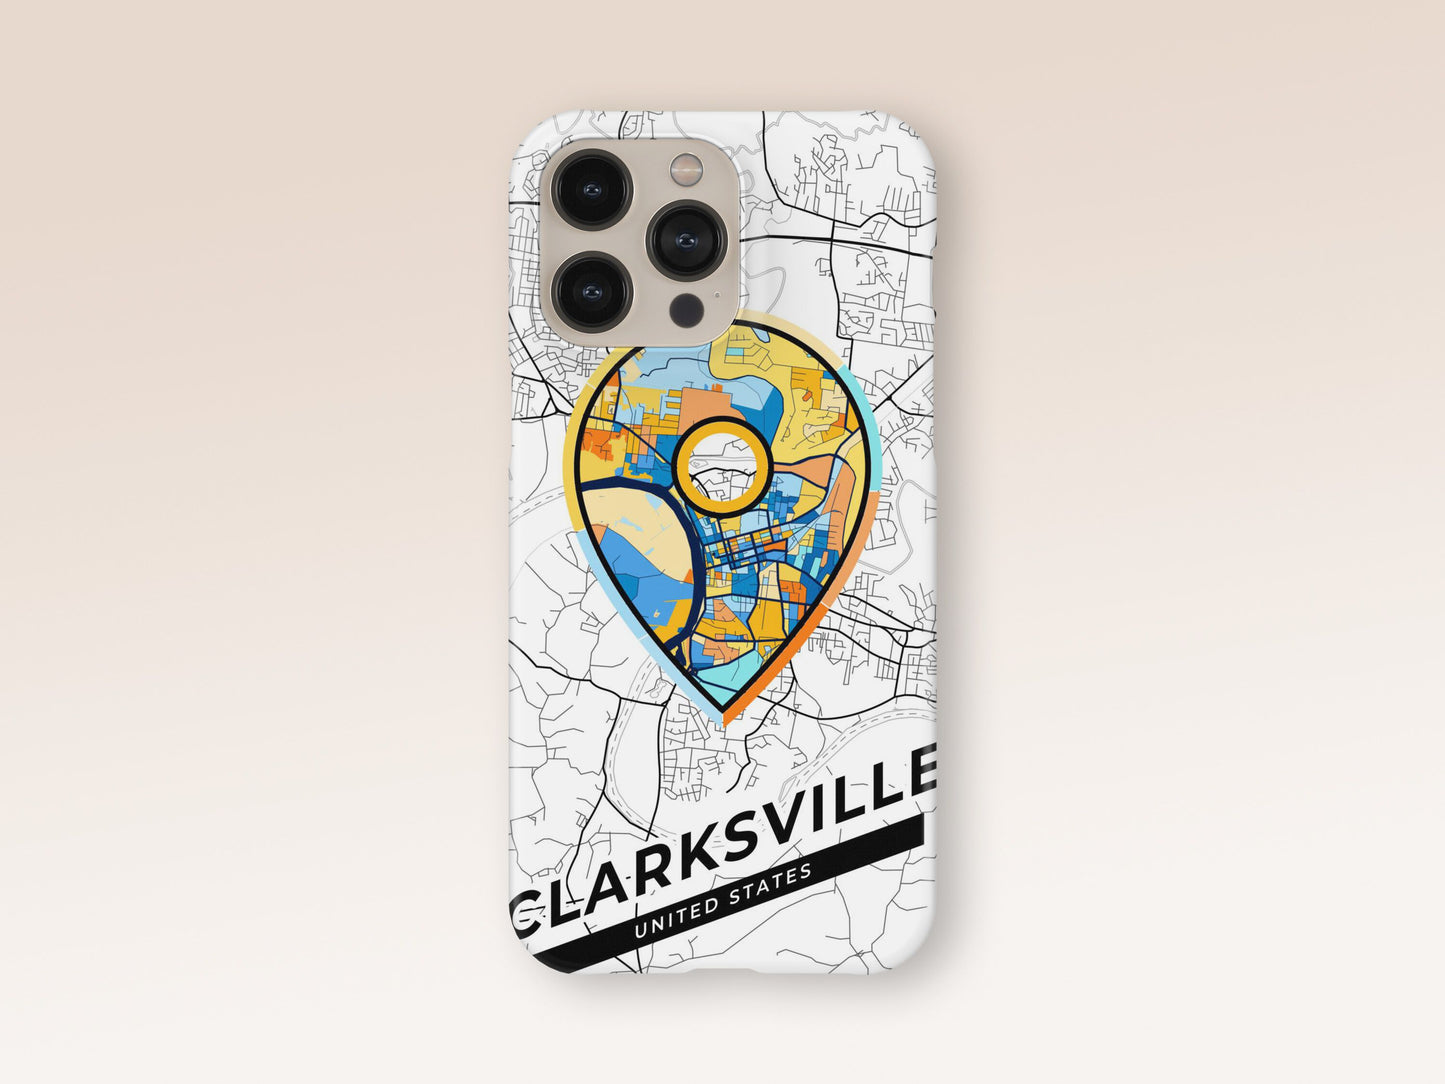 Clarksville Tennessee slim phone case with colorful icon. Birthday, wedding or housewarming gift. Couple match cases. 1